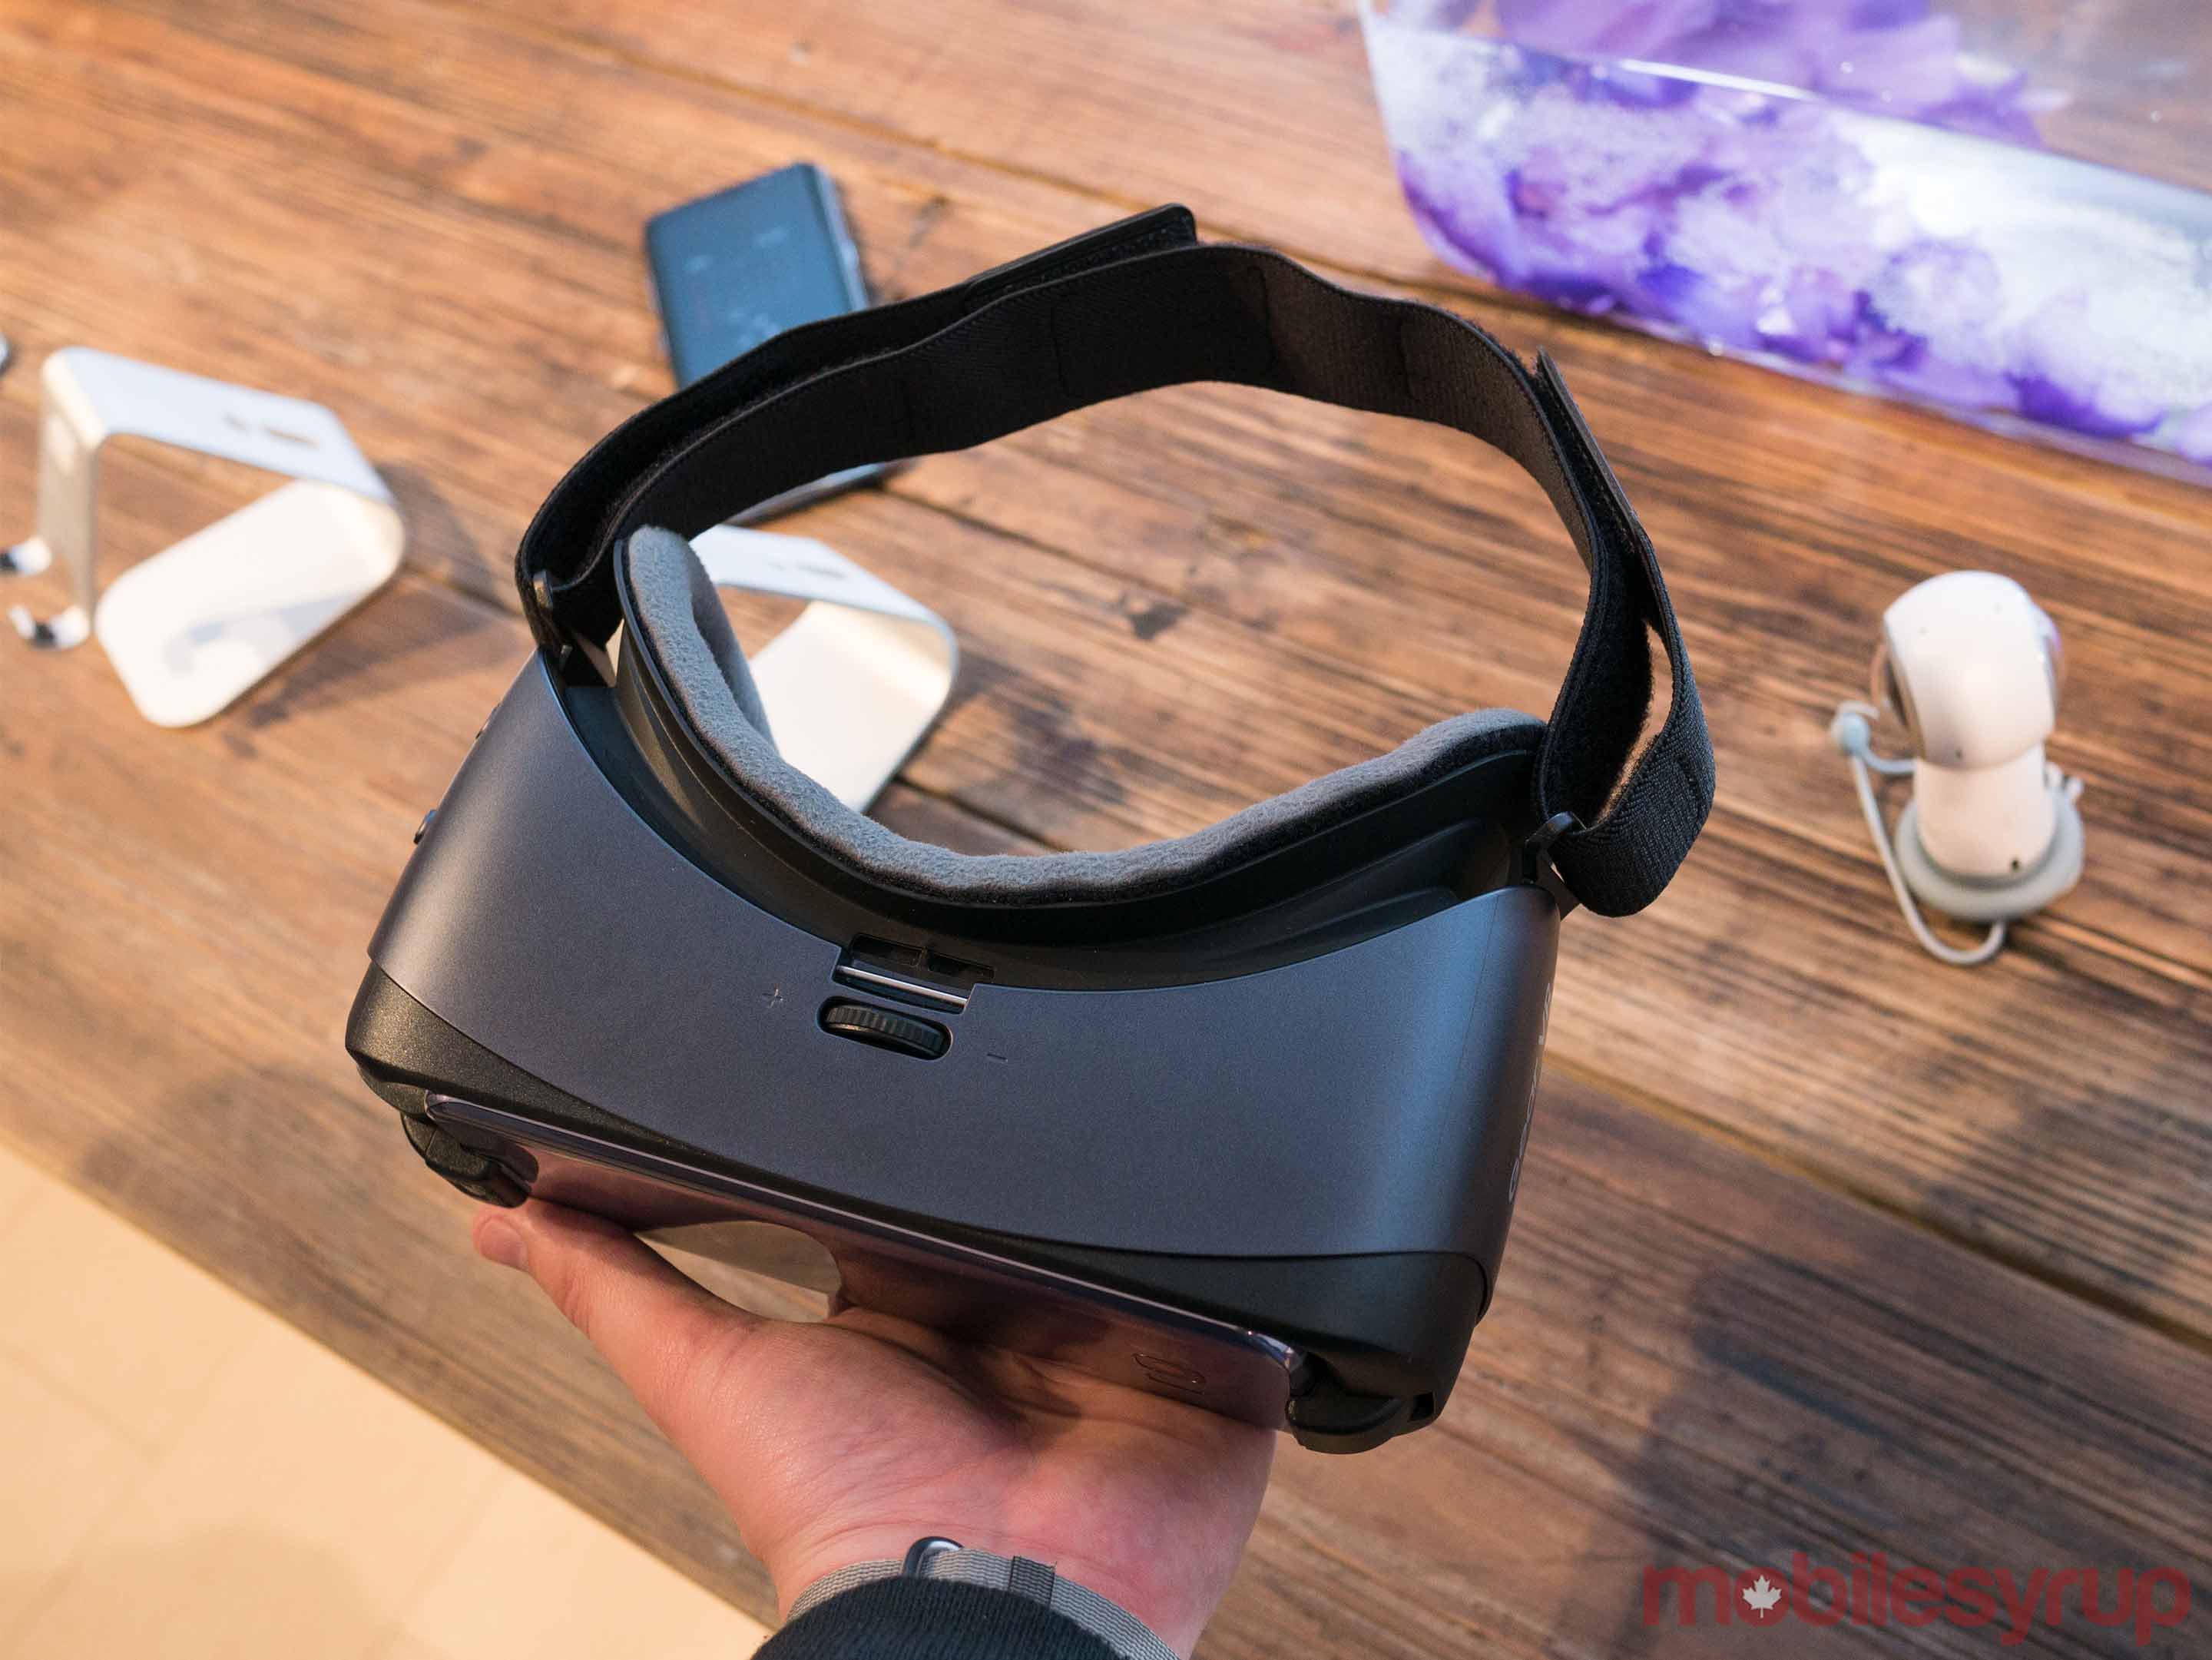 Gear VR in hand